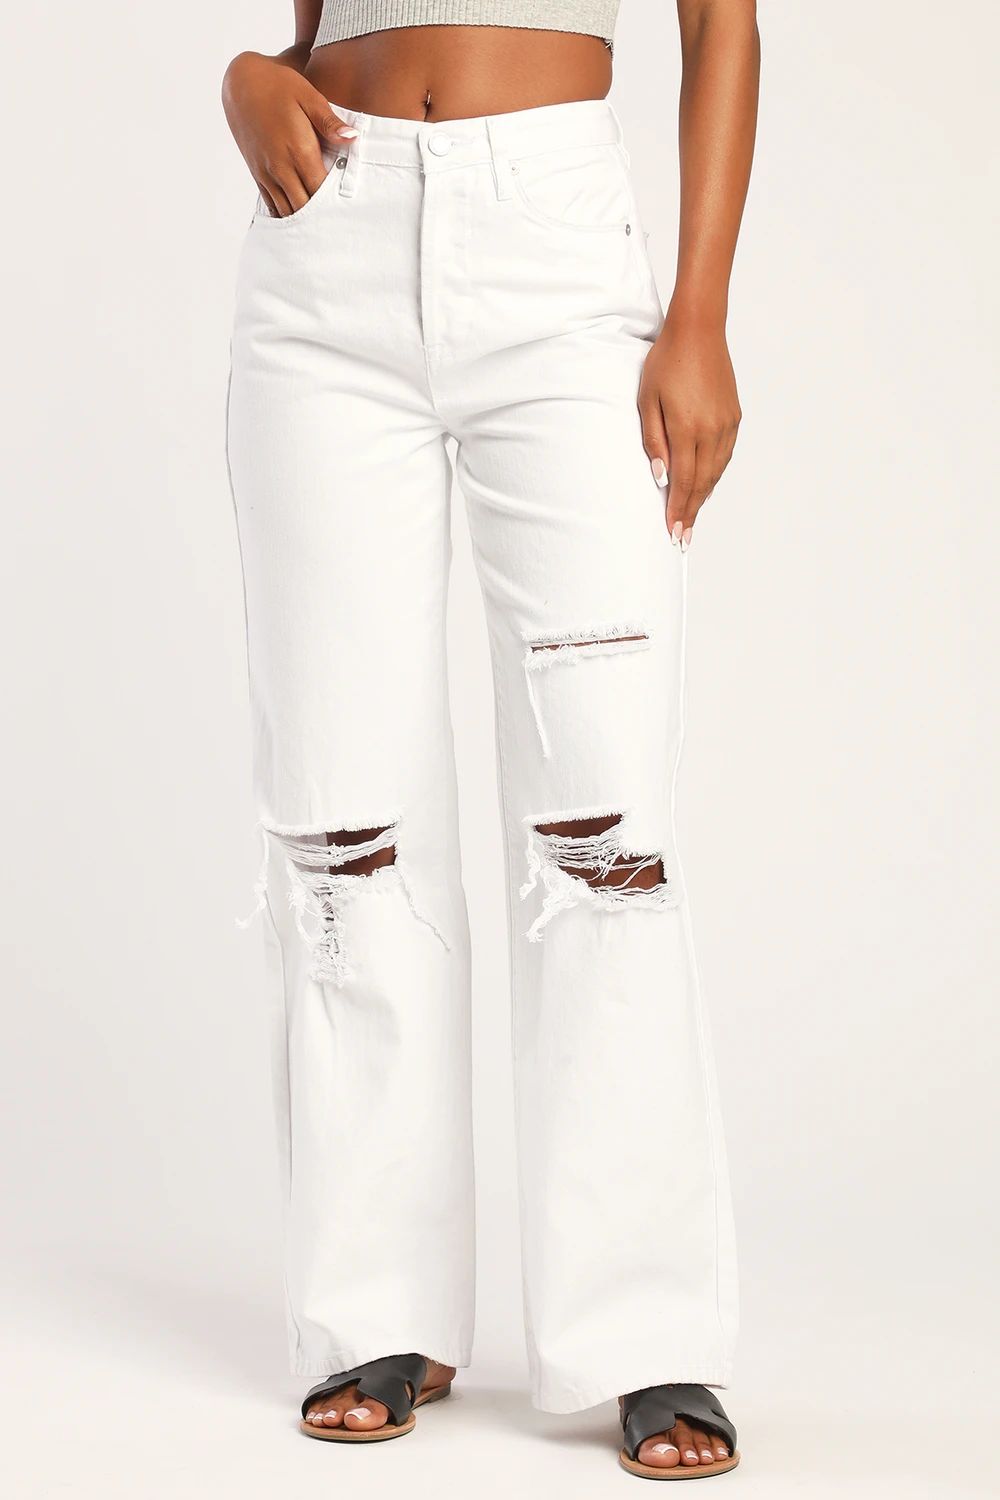 Head in the Clouds White Distressed Flare Denim Jeans | Lulus (US)